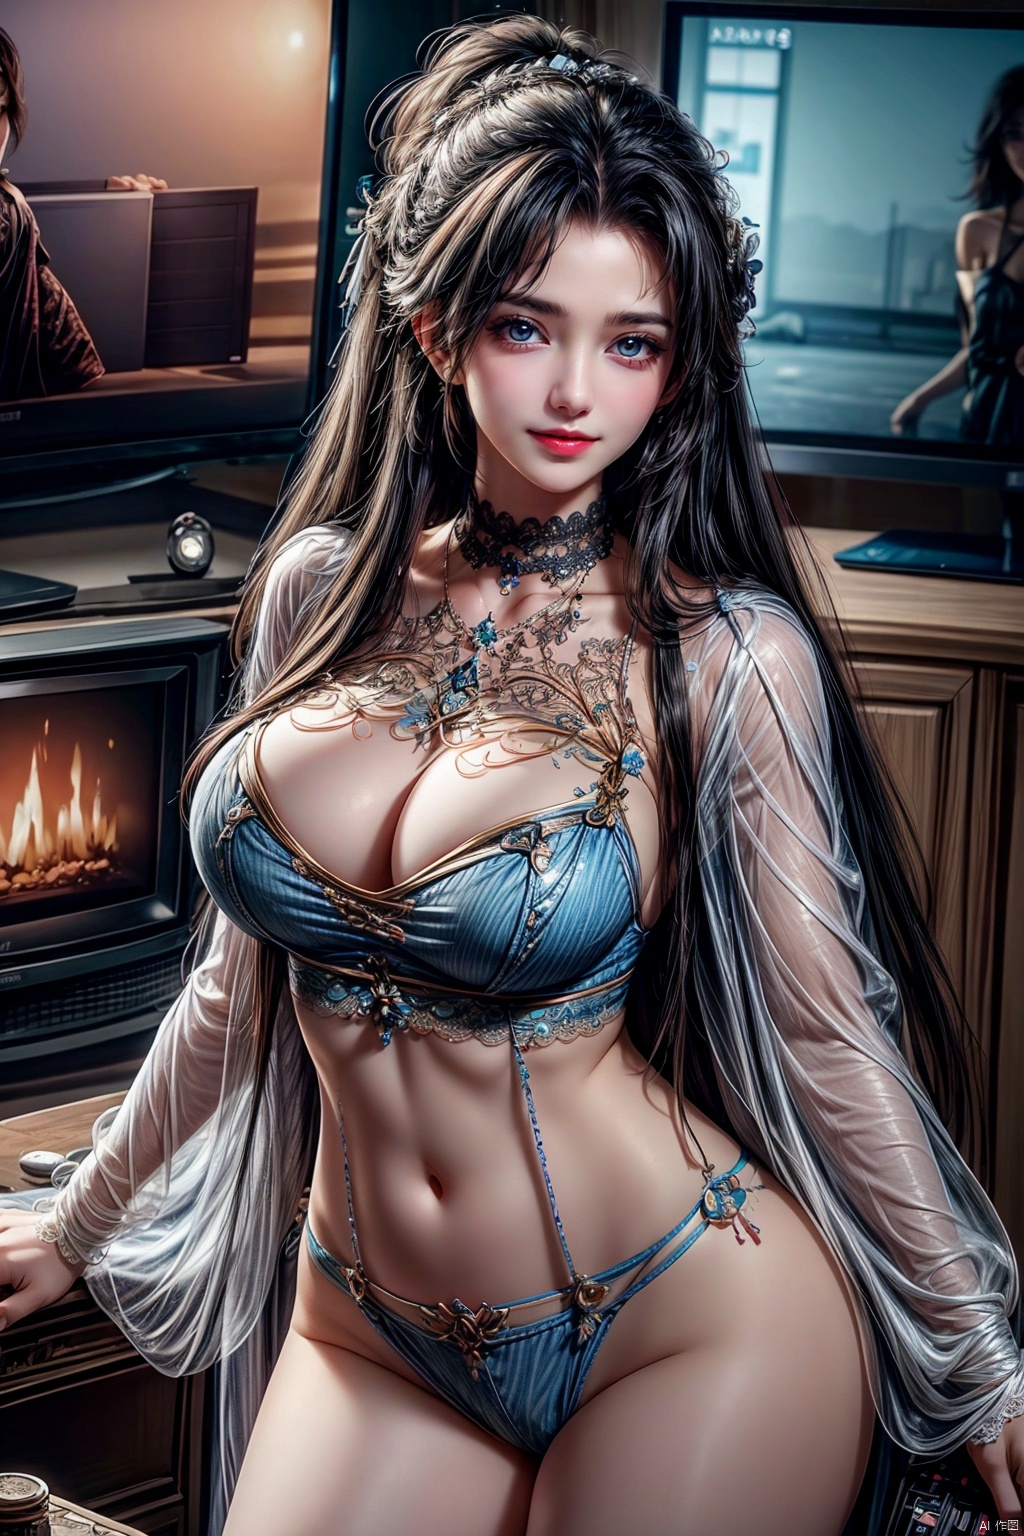  nsfw,80sDBA style, fashion, Best quality, masterpiece, high-resolution, 4K, 1 girl, smile, exquisite makeup,shirt,jean,lace, tv,boombox ,longhair , yunv, dlrb,